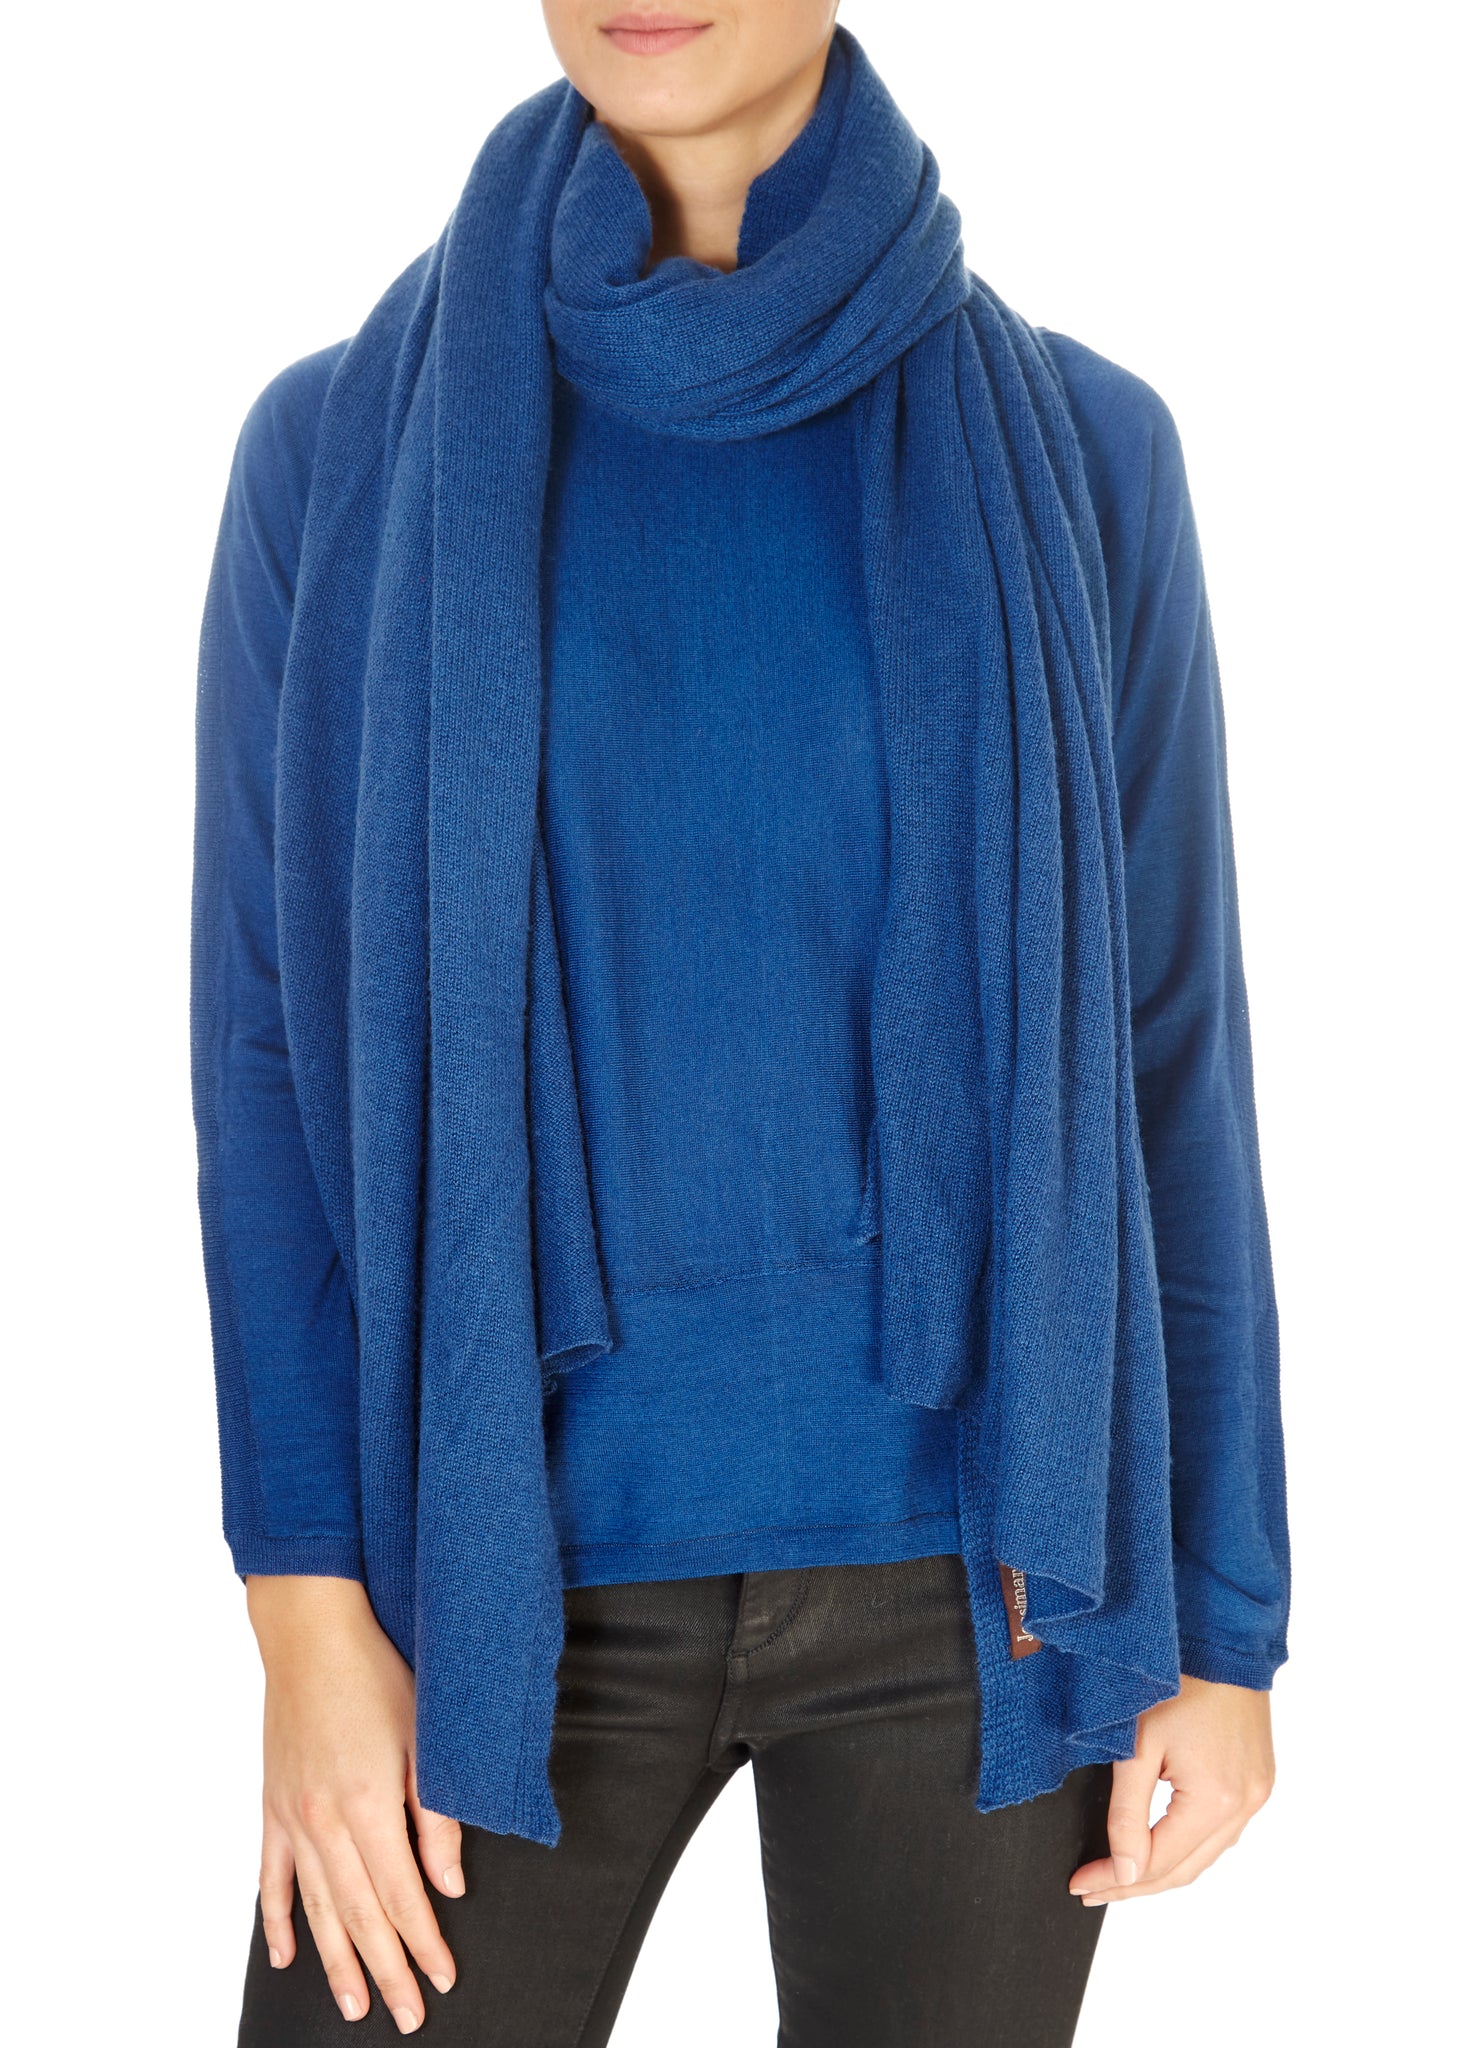 Teal Blue Cashmere Scarf and Wrap - Jessimara